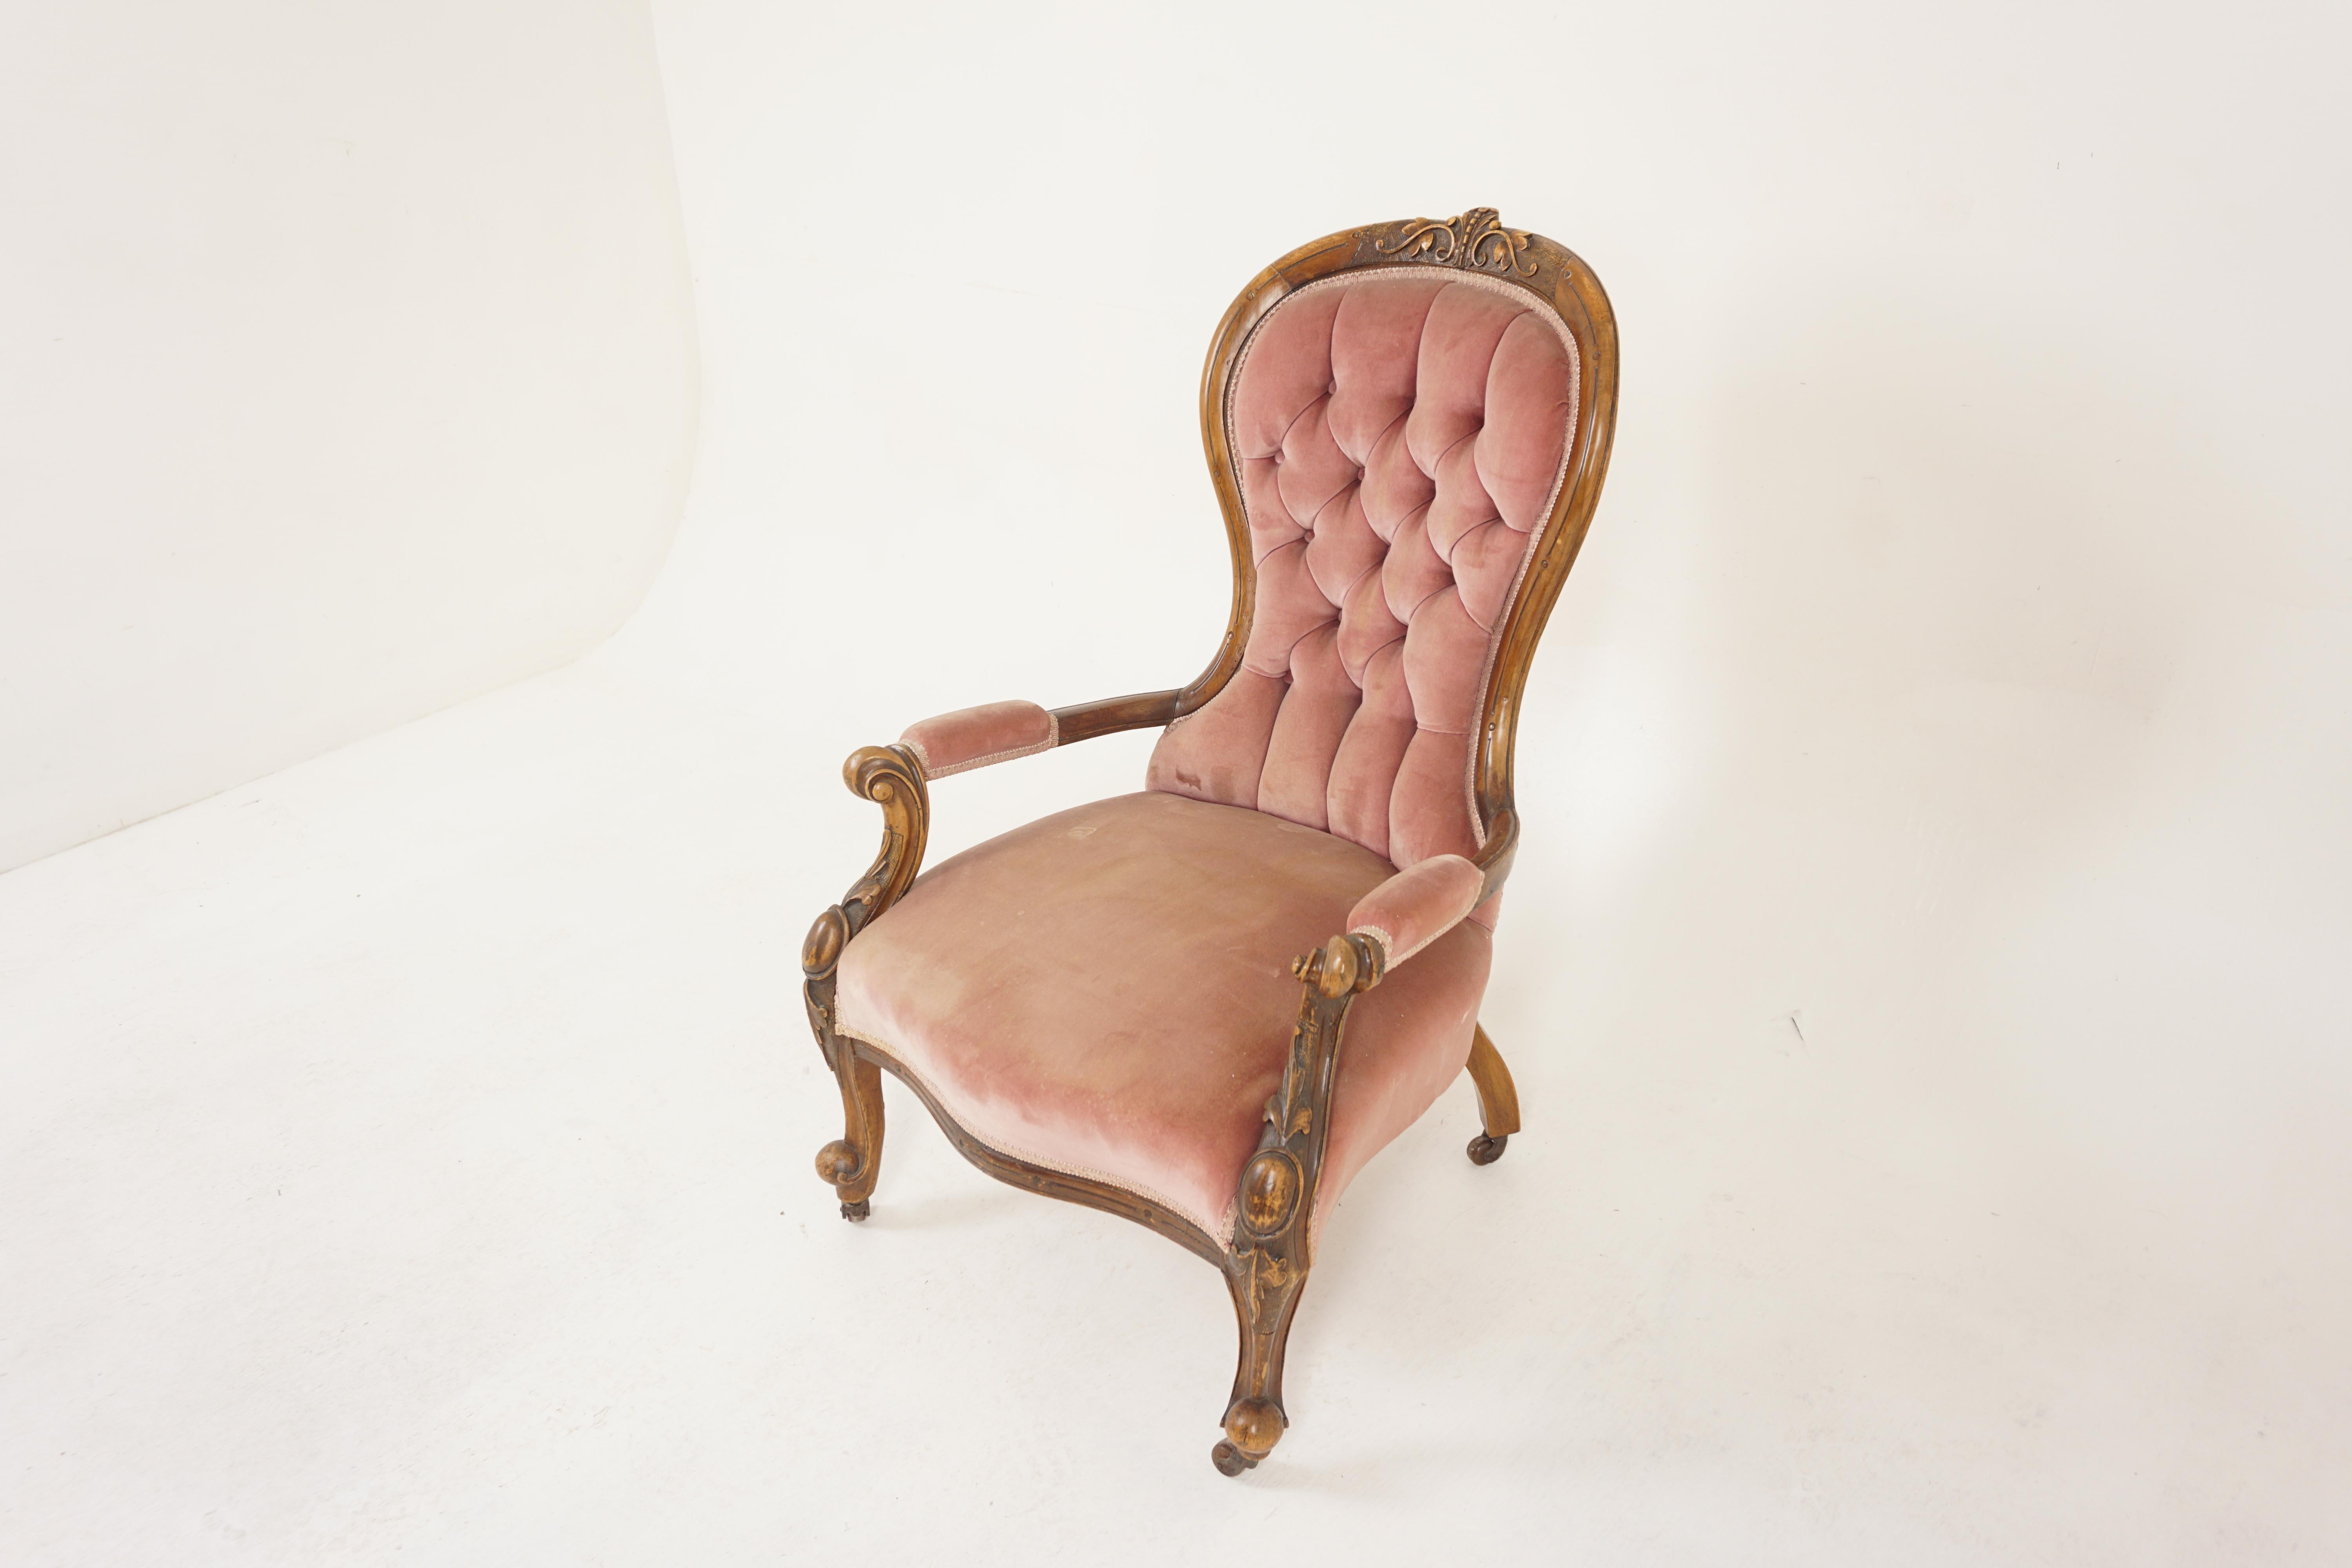 Quality Mid Victorian Carved Gentlemen's Arm Chair, Scotland 1870, H1151

Scotland 1870
Solid Walnut
Original Finish
Carved top rail
With spoon back and button upholstered panels
With curved and partially upholstered scrolled arms with acanthus